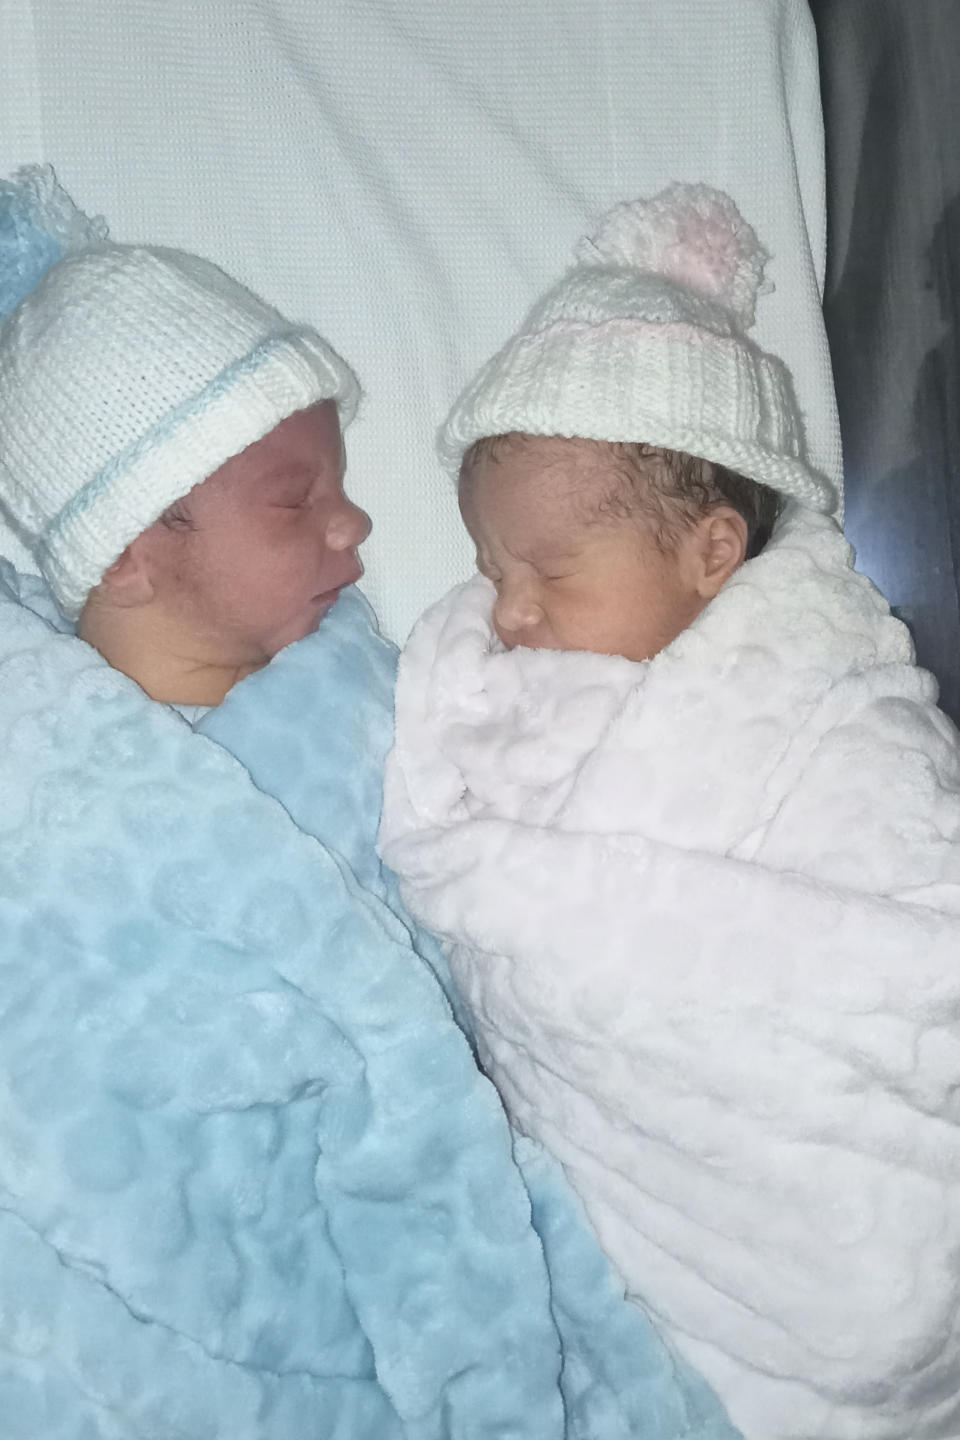 The twins' unusual birth was a first for the hospital. (Diane McLaren/SWNS)